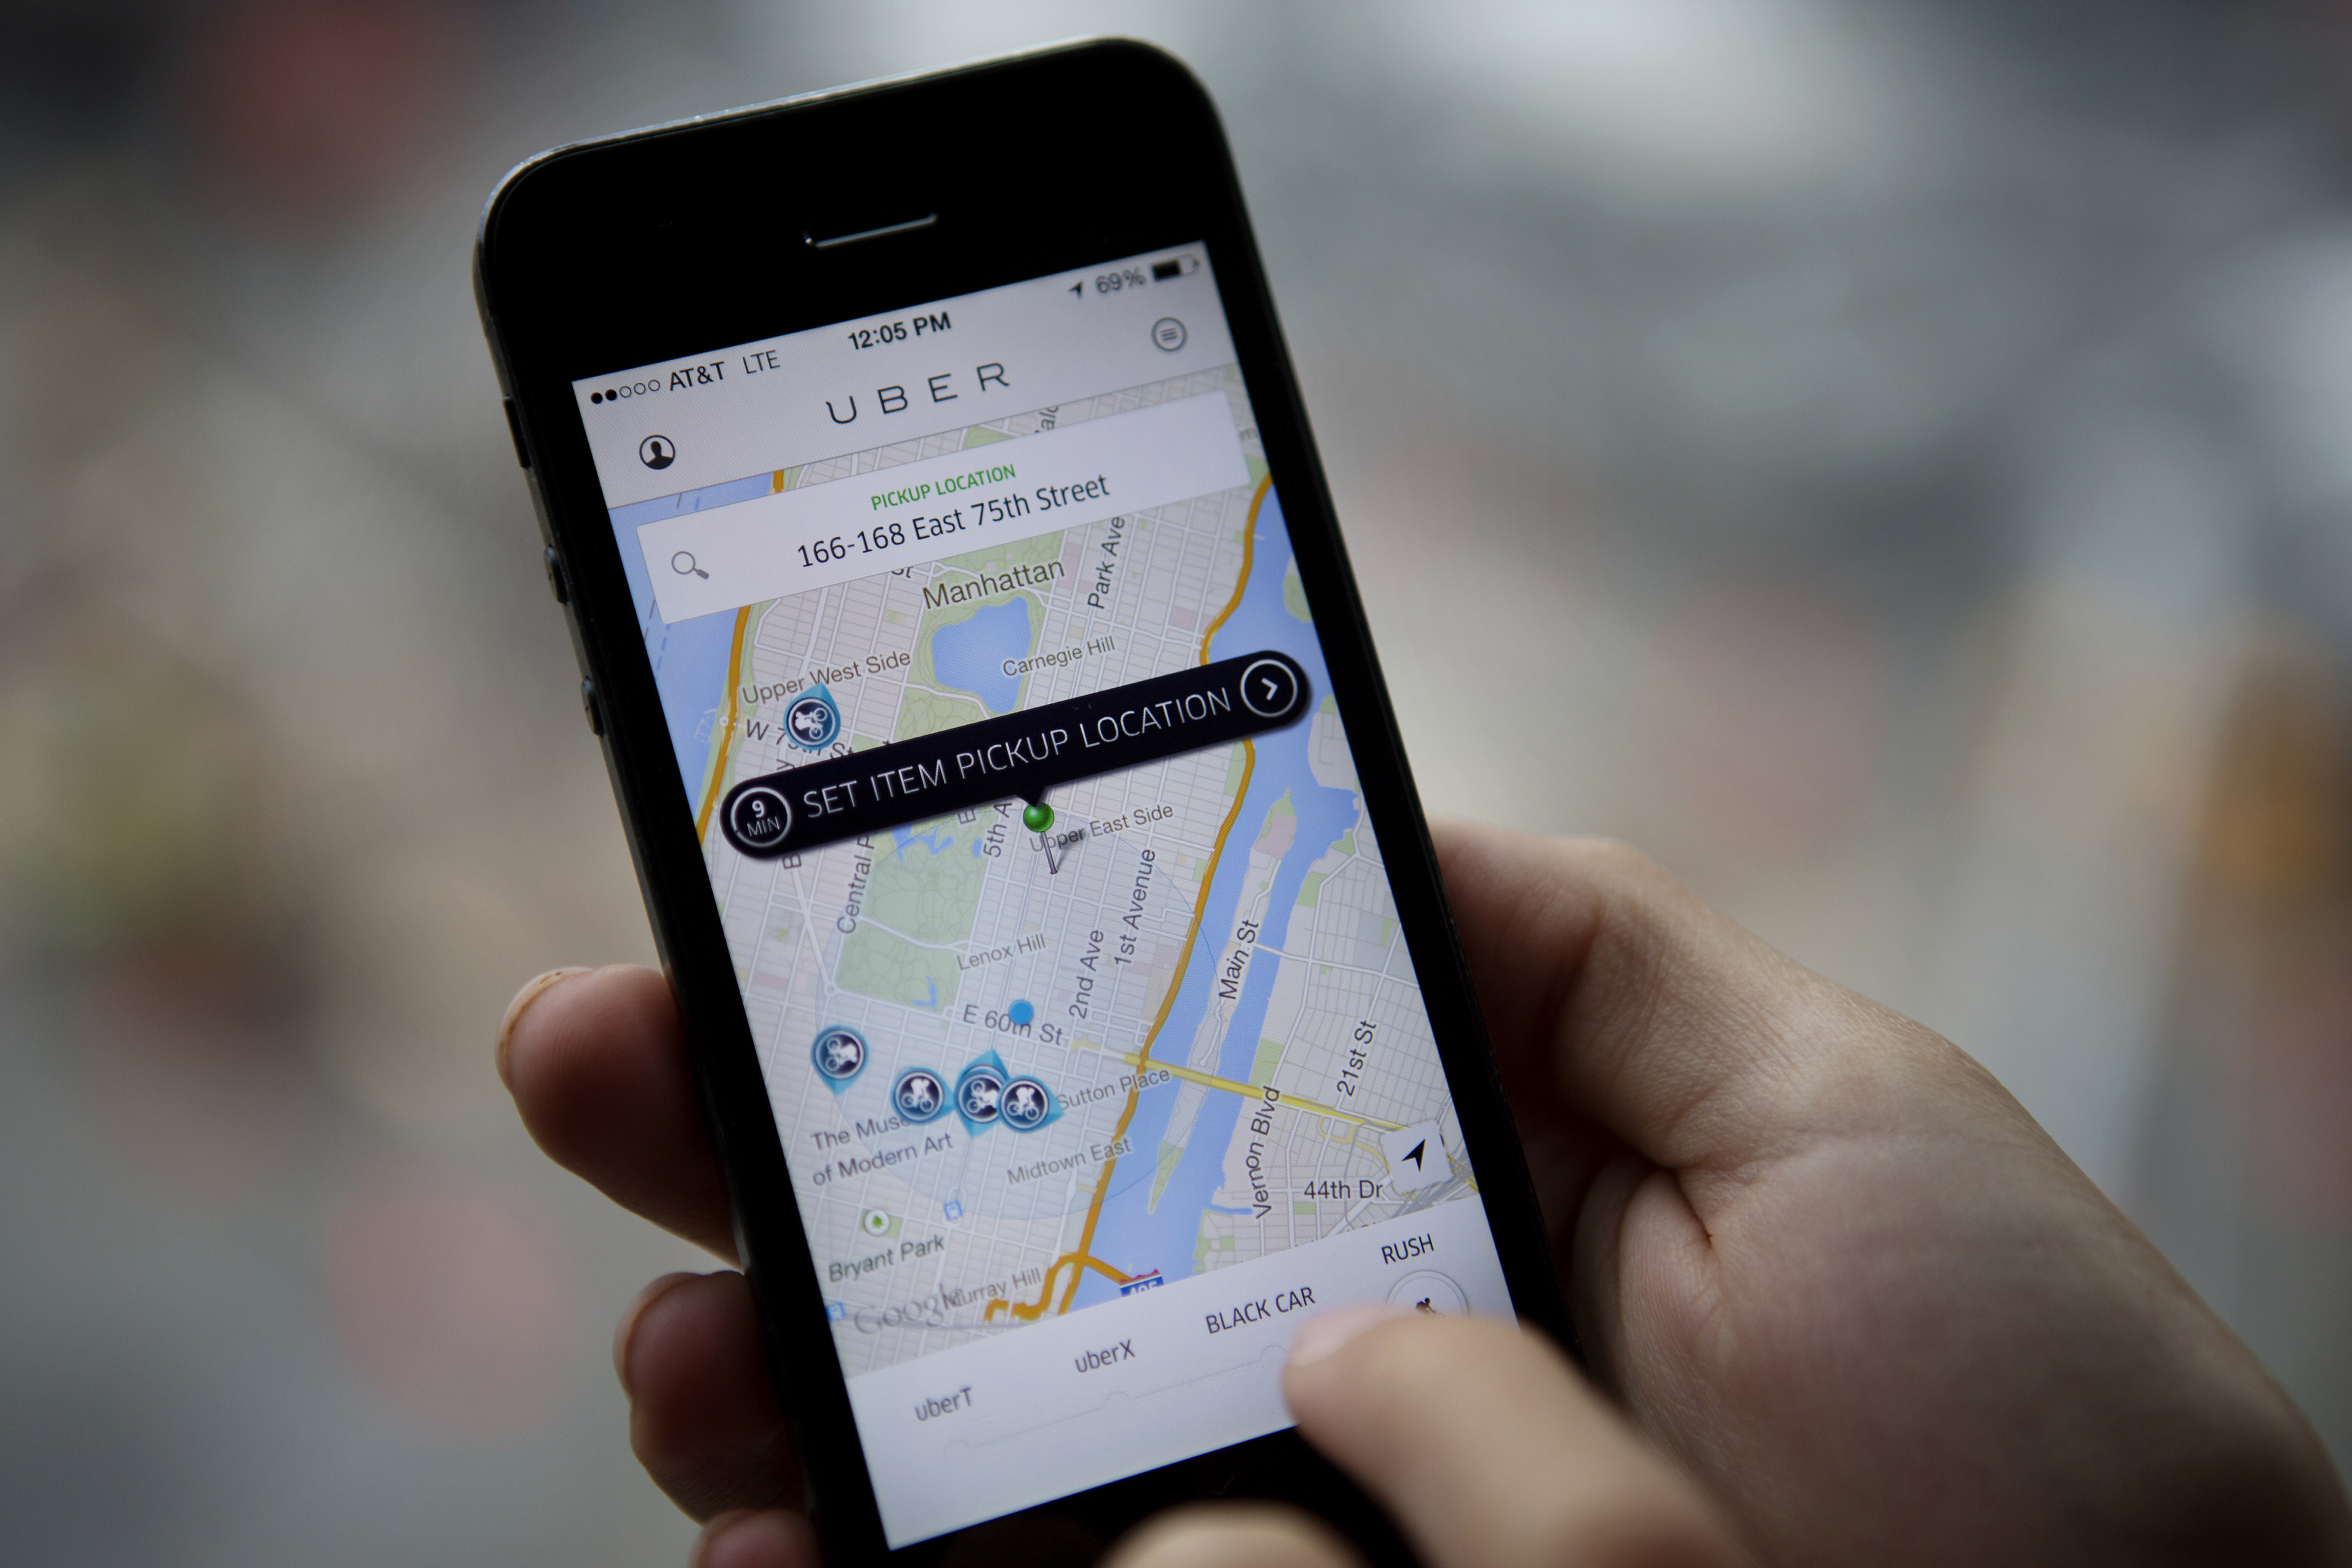 Uber's ride request is displayed on an iPhone in New York, U.S., on Wednesday, Aug. 6, 2014. (Victor J. Blue—Bloomberg / Getty Images)